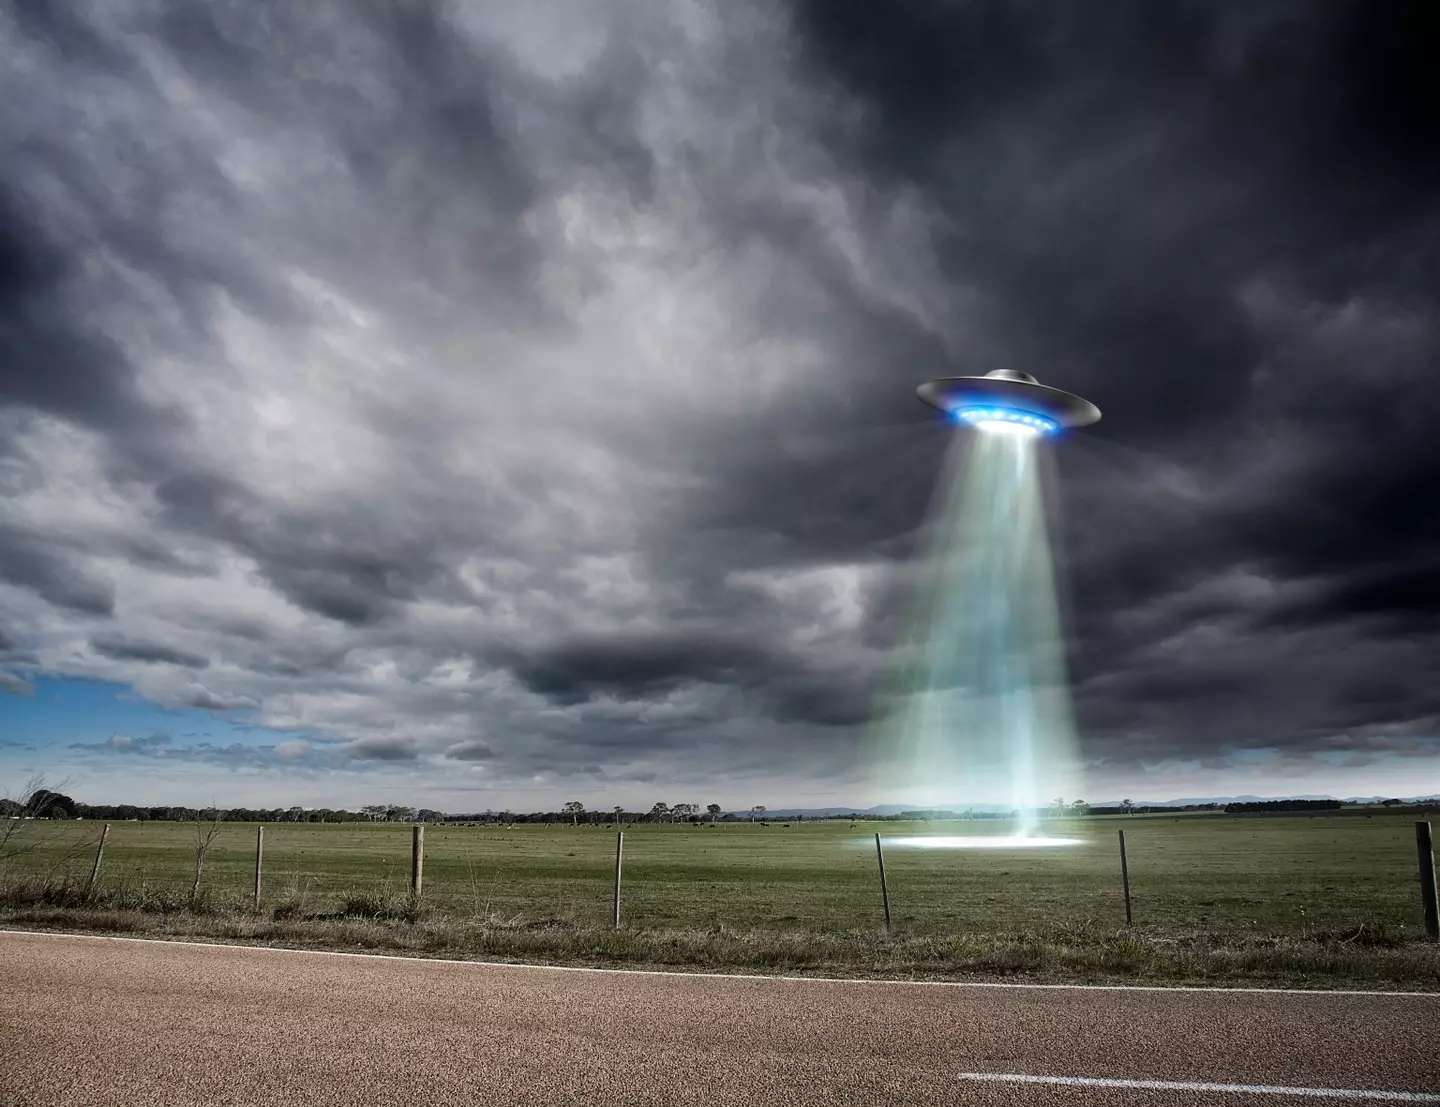 The appearance of UFOs have been popularized by popular culture.